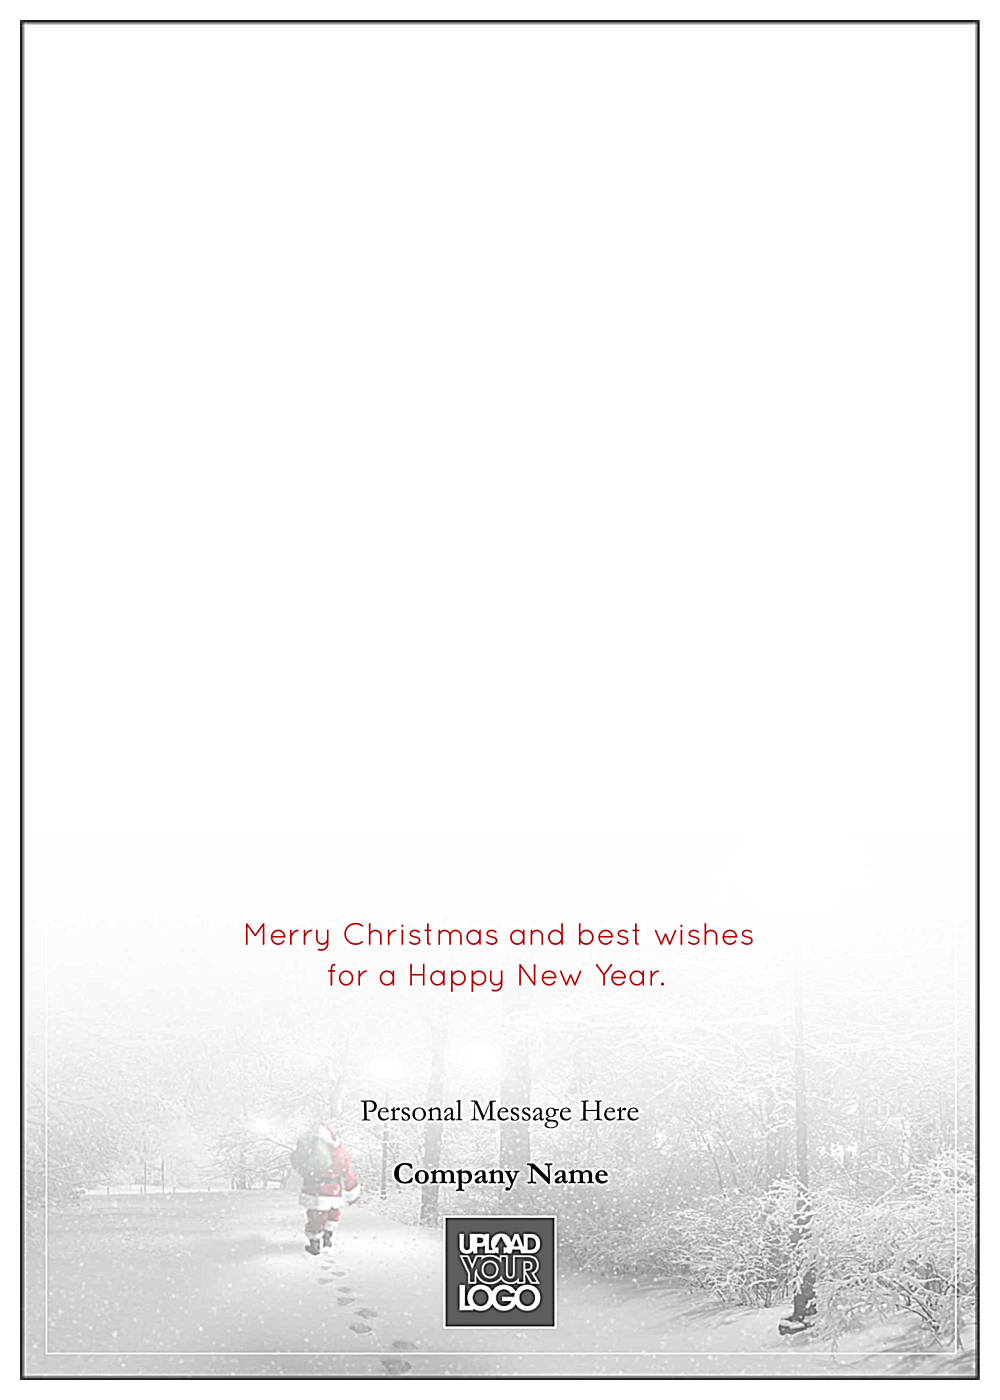 Snowy Merry Christmas back - Greeting Cards Maker